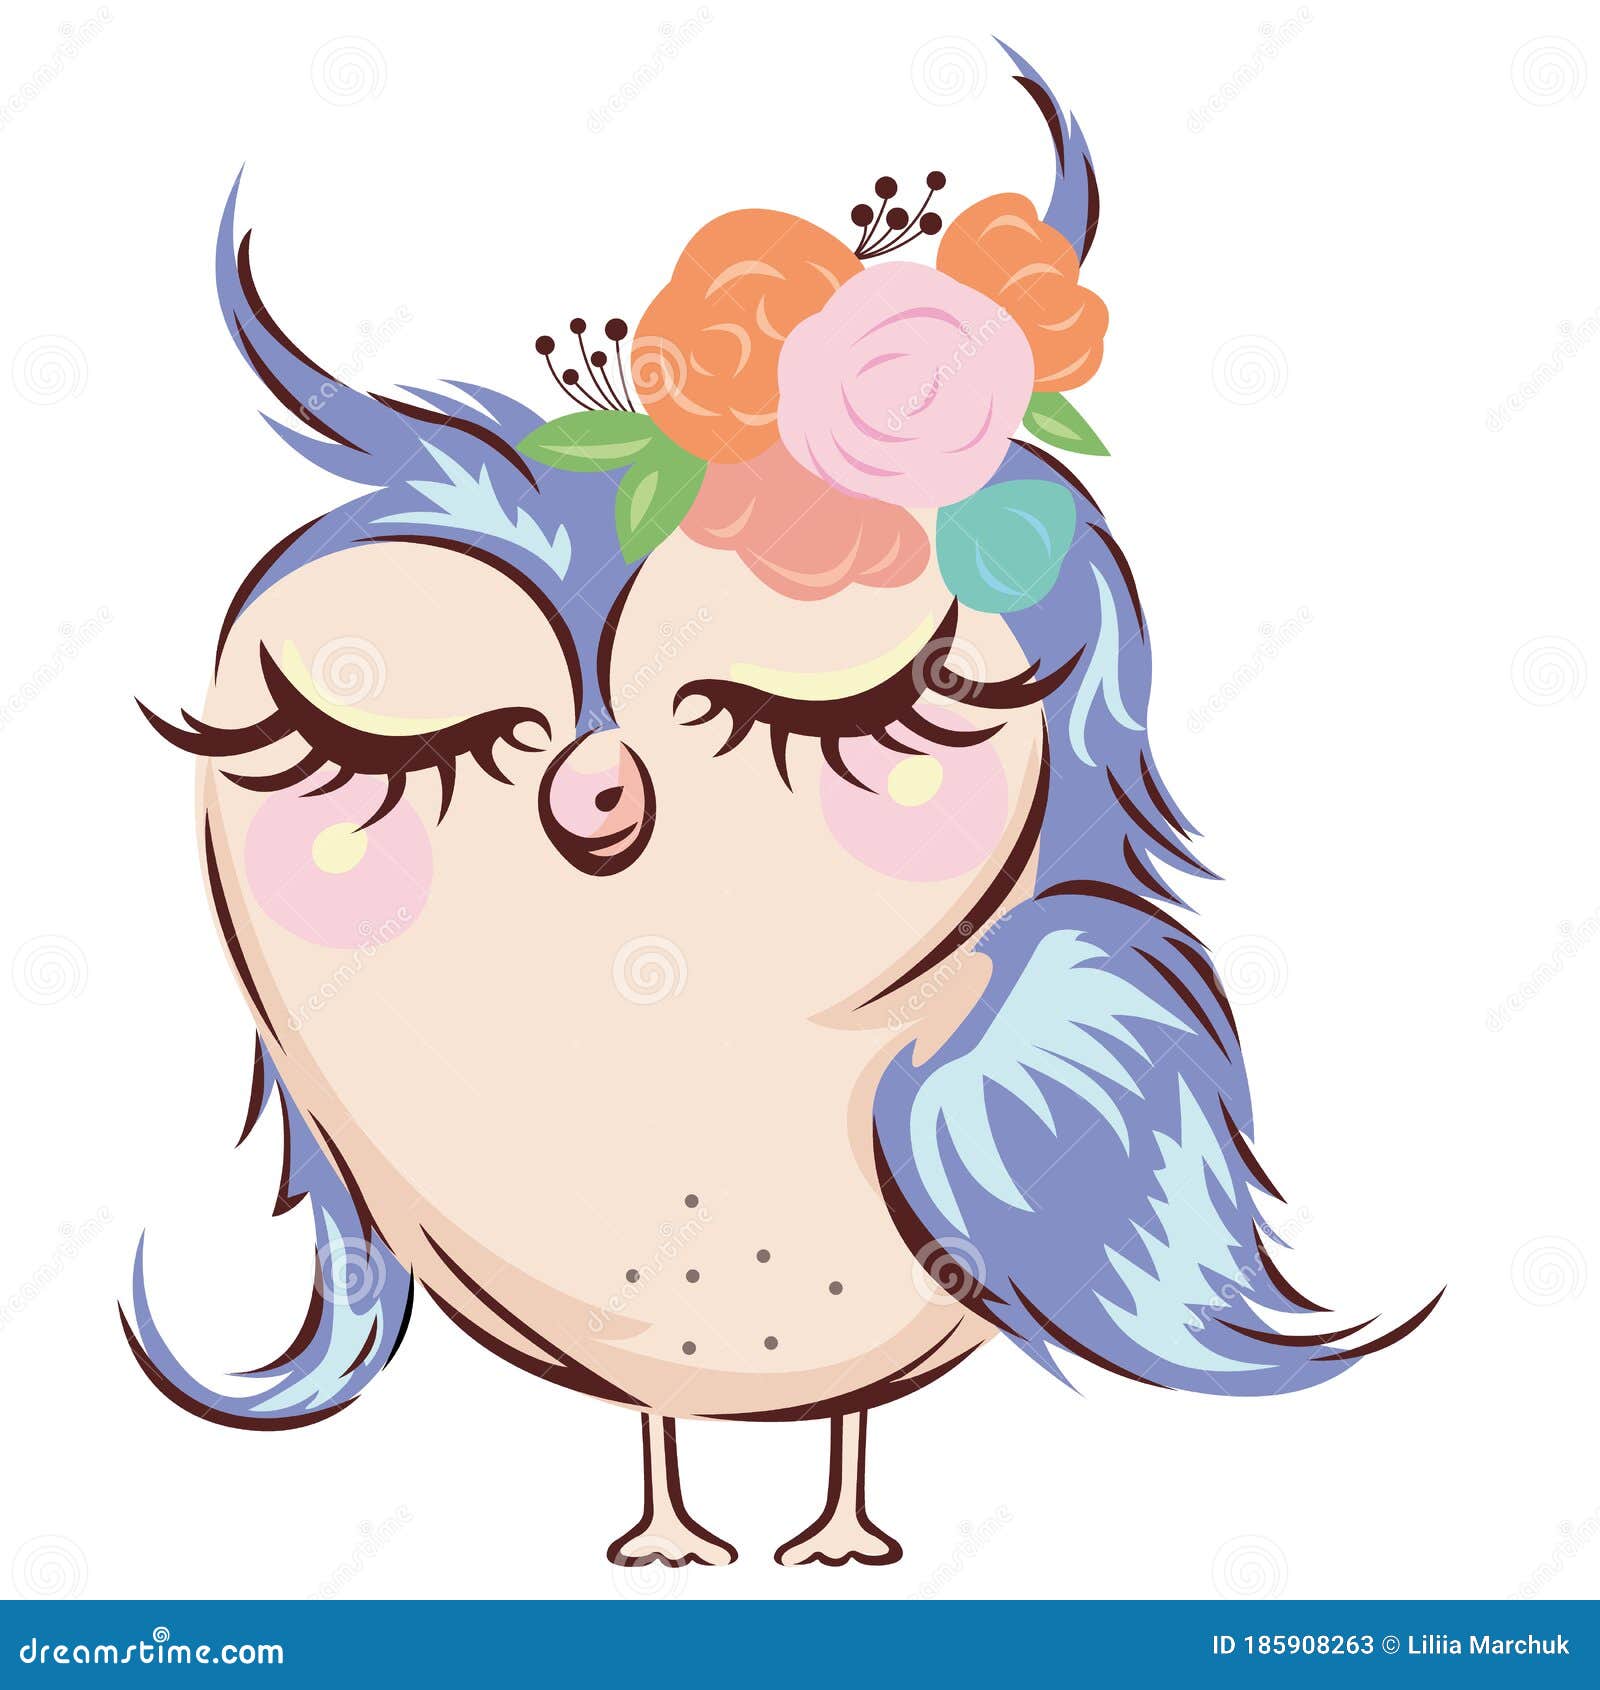 Owl with Closed Eyes with Happiness. Cartoon Cute Postcard Sleeping Owl  Girl with Blue Hair and Flowers Stock Vector - Illustration of funny, girl:  185908263